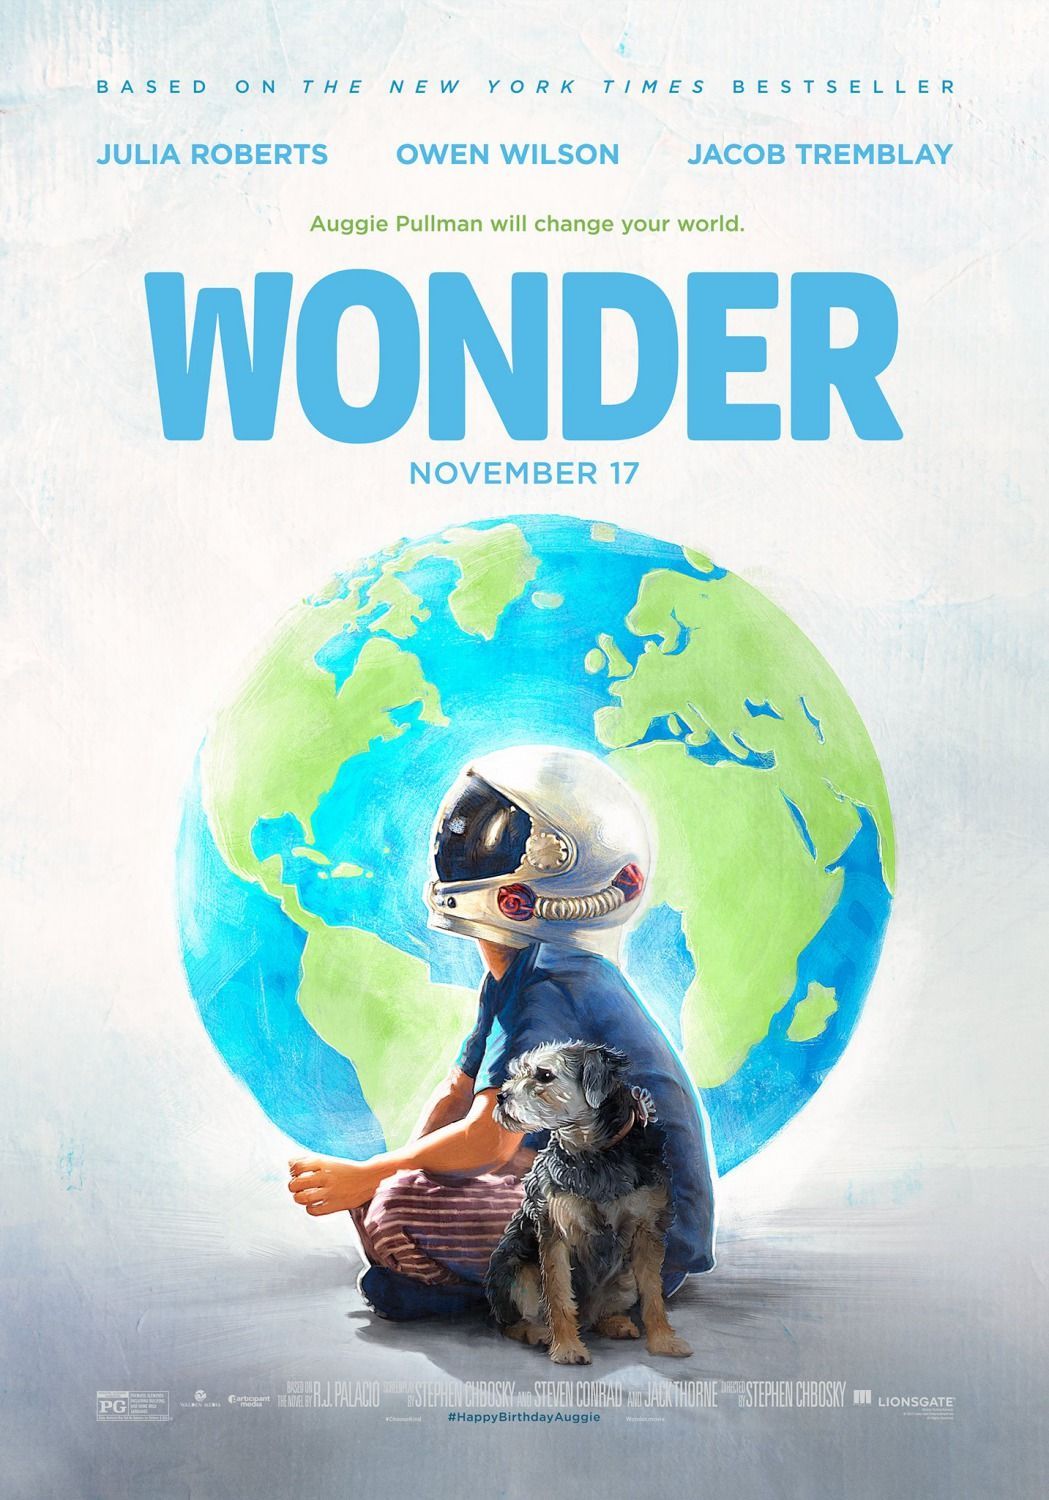 New Movie Posters for Wonder. Looking film, Wonder book cover